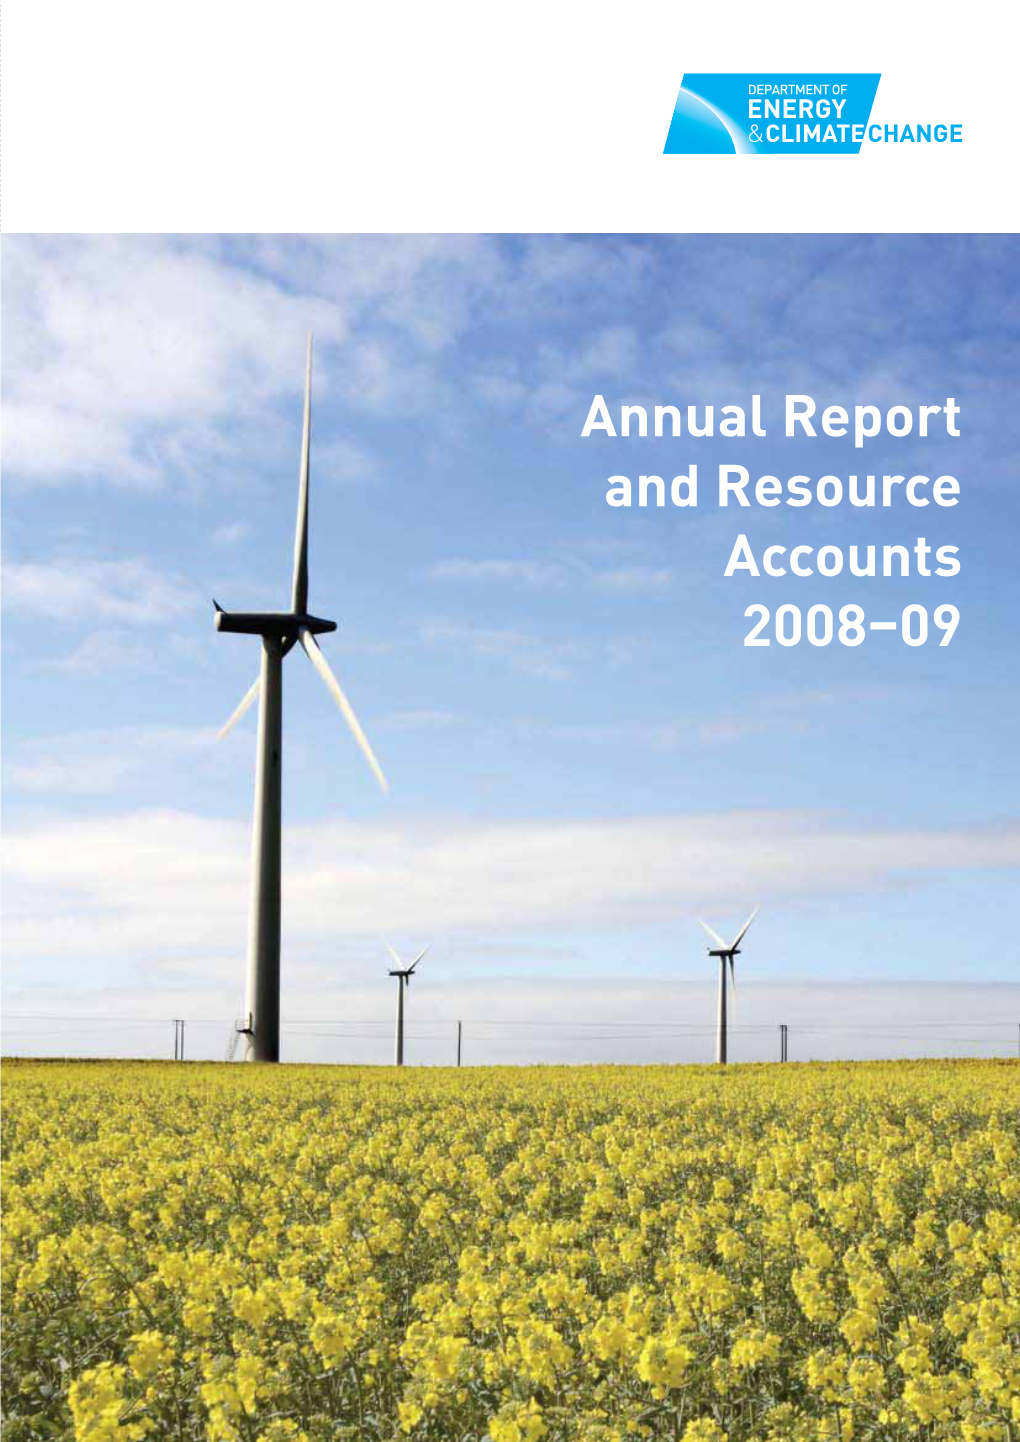 Department of Energy and Climate Change Annual Report